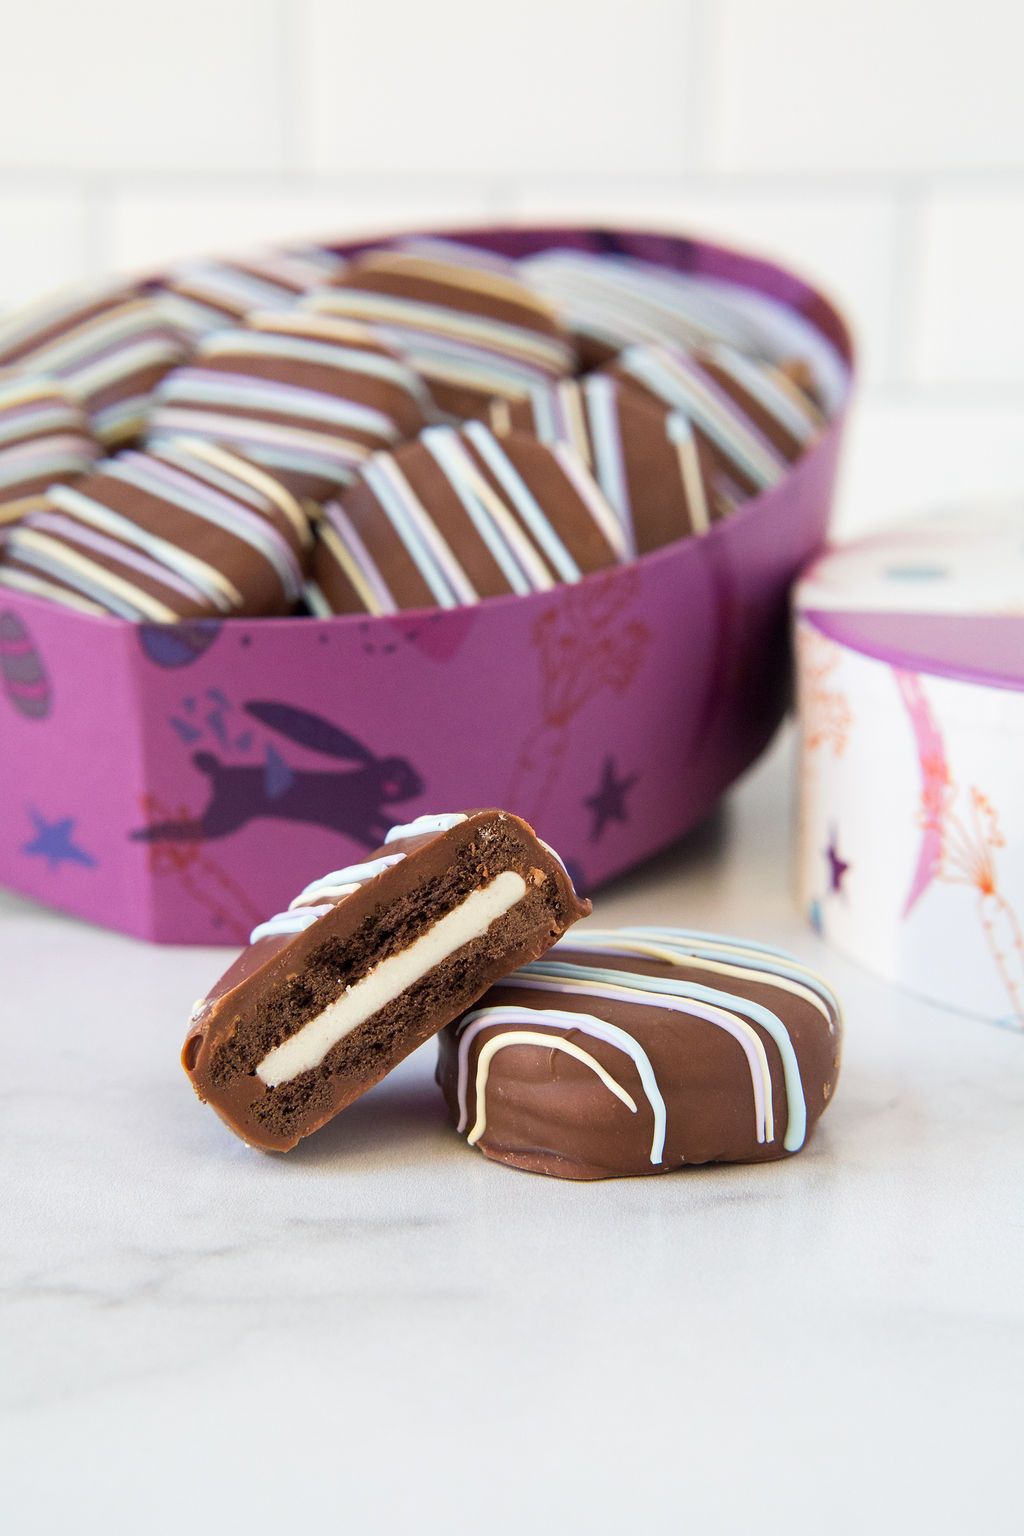 Egg-shaped stainless box in the background and a milk chocolate sandwich cookies.